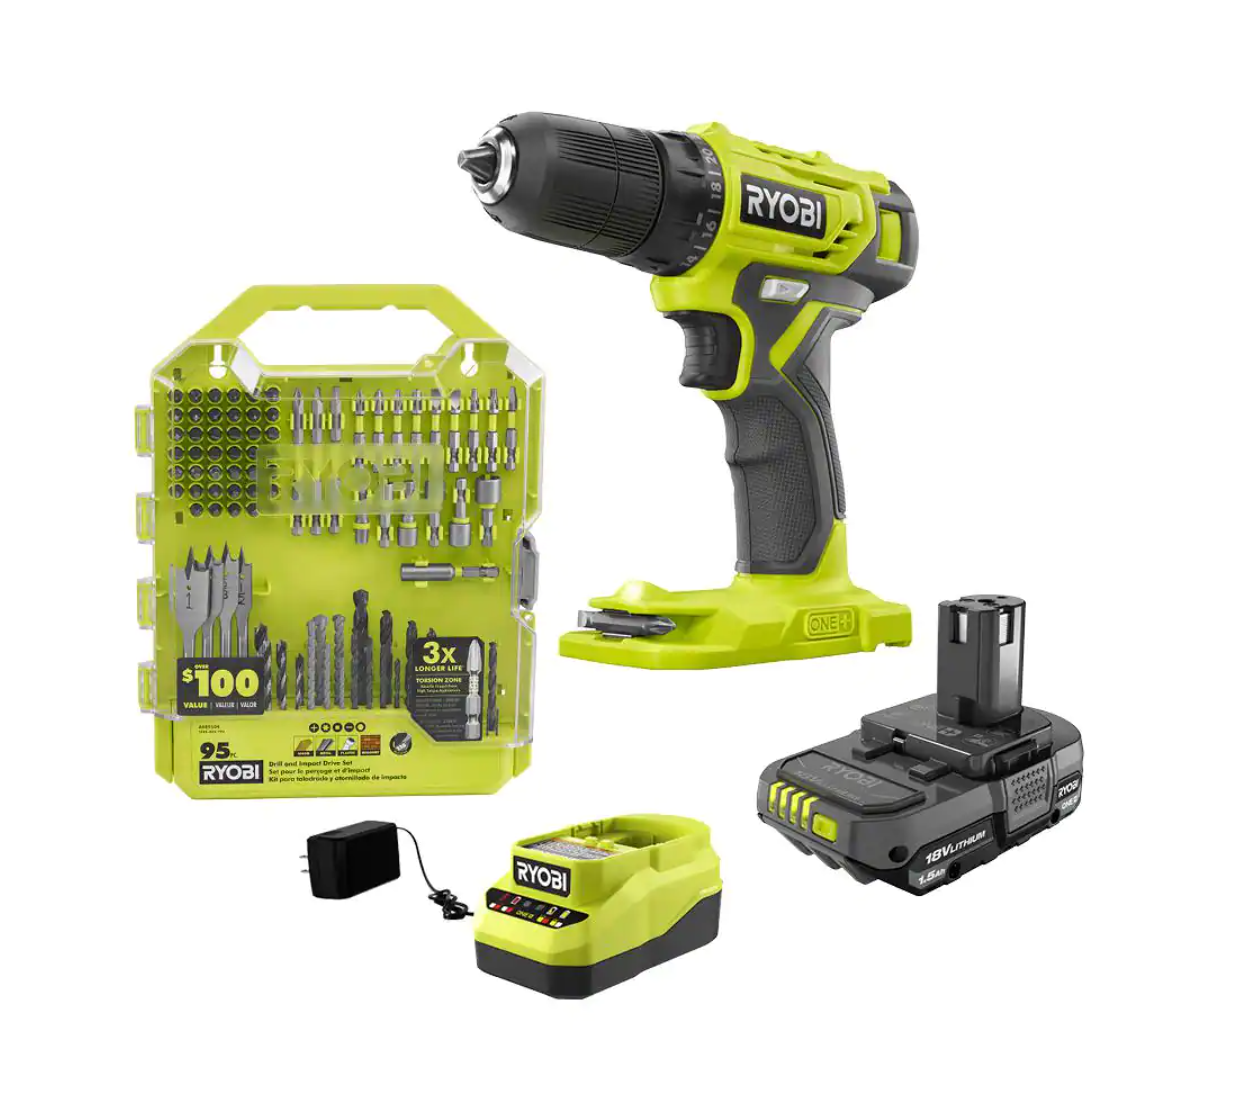 https://bigbigmart.com/wp-content/uploads/2022/07/RYOBI-PDD209K-A989504-ONE-18V-Cordless-3.8-in.-Drill-Driver-Kit-with-1.5-Ah-Battery-Charger-and-Drill-and-Drive-Kit-95-Piece.png